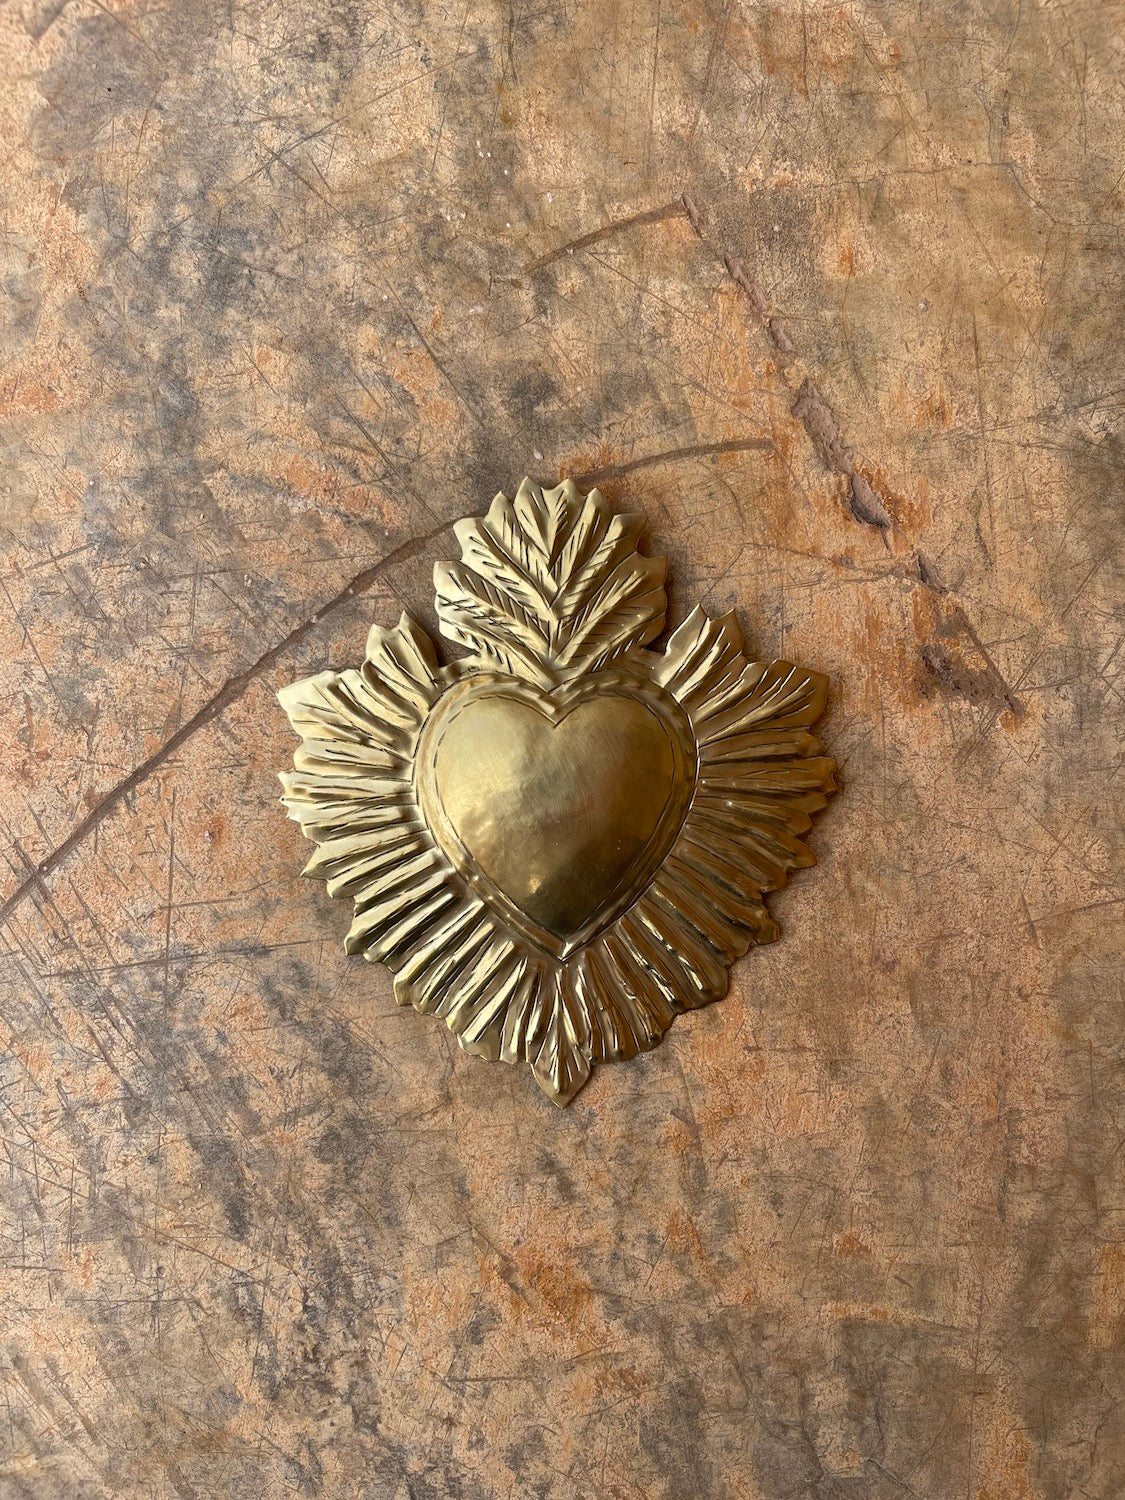 Moroccan Brass Wall Decor Flaming Heart Metal Wall Ornament-Small Decor Une Vie Nomade Brand_Une Vie Nomade Home_Decor New Arrivals IMG_1844MoroccanFlamingHeartMetalWallOrnament-Small